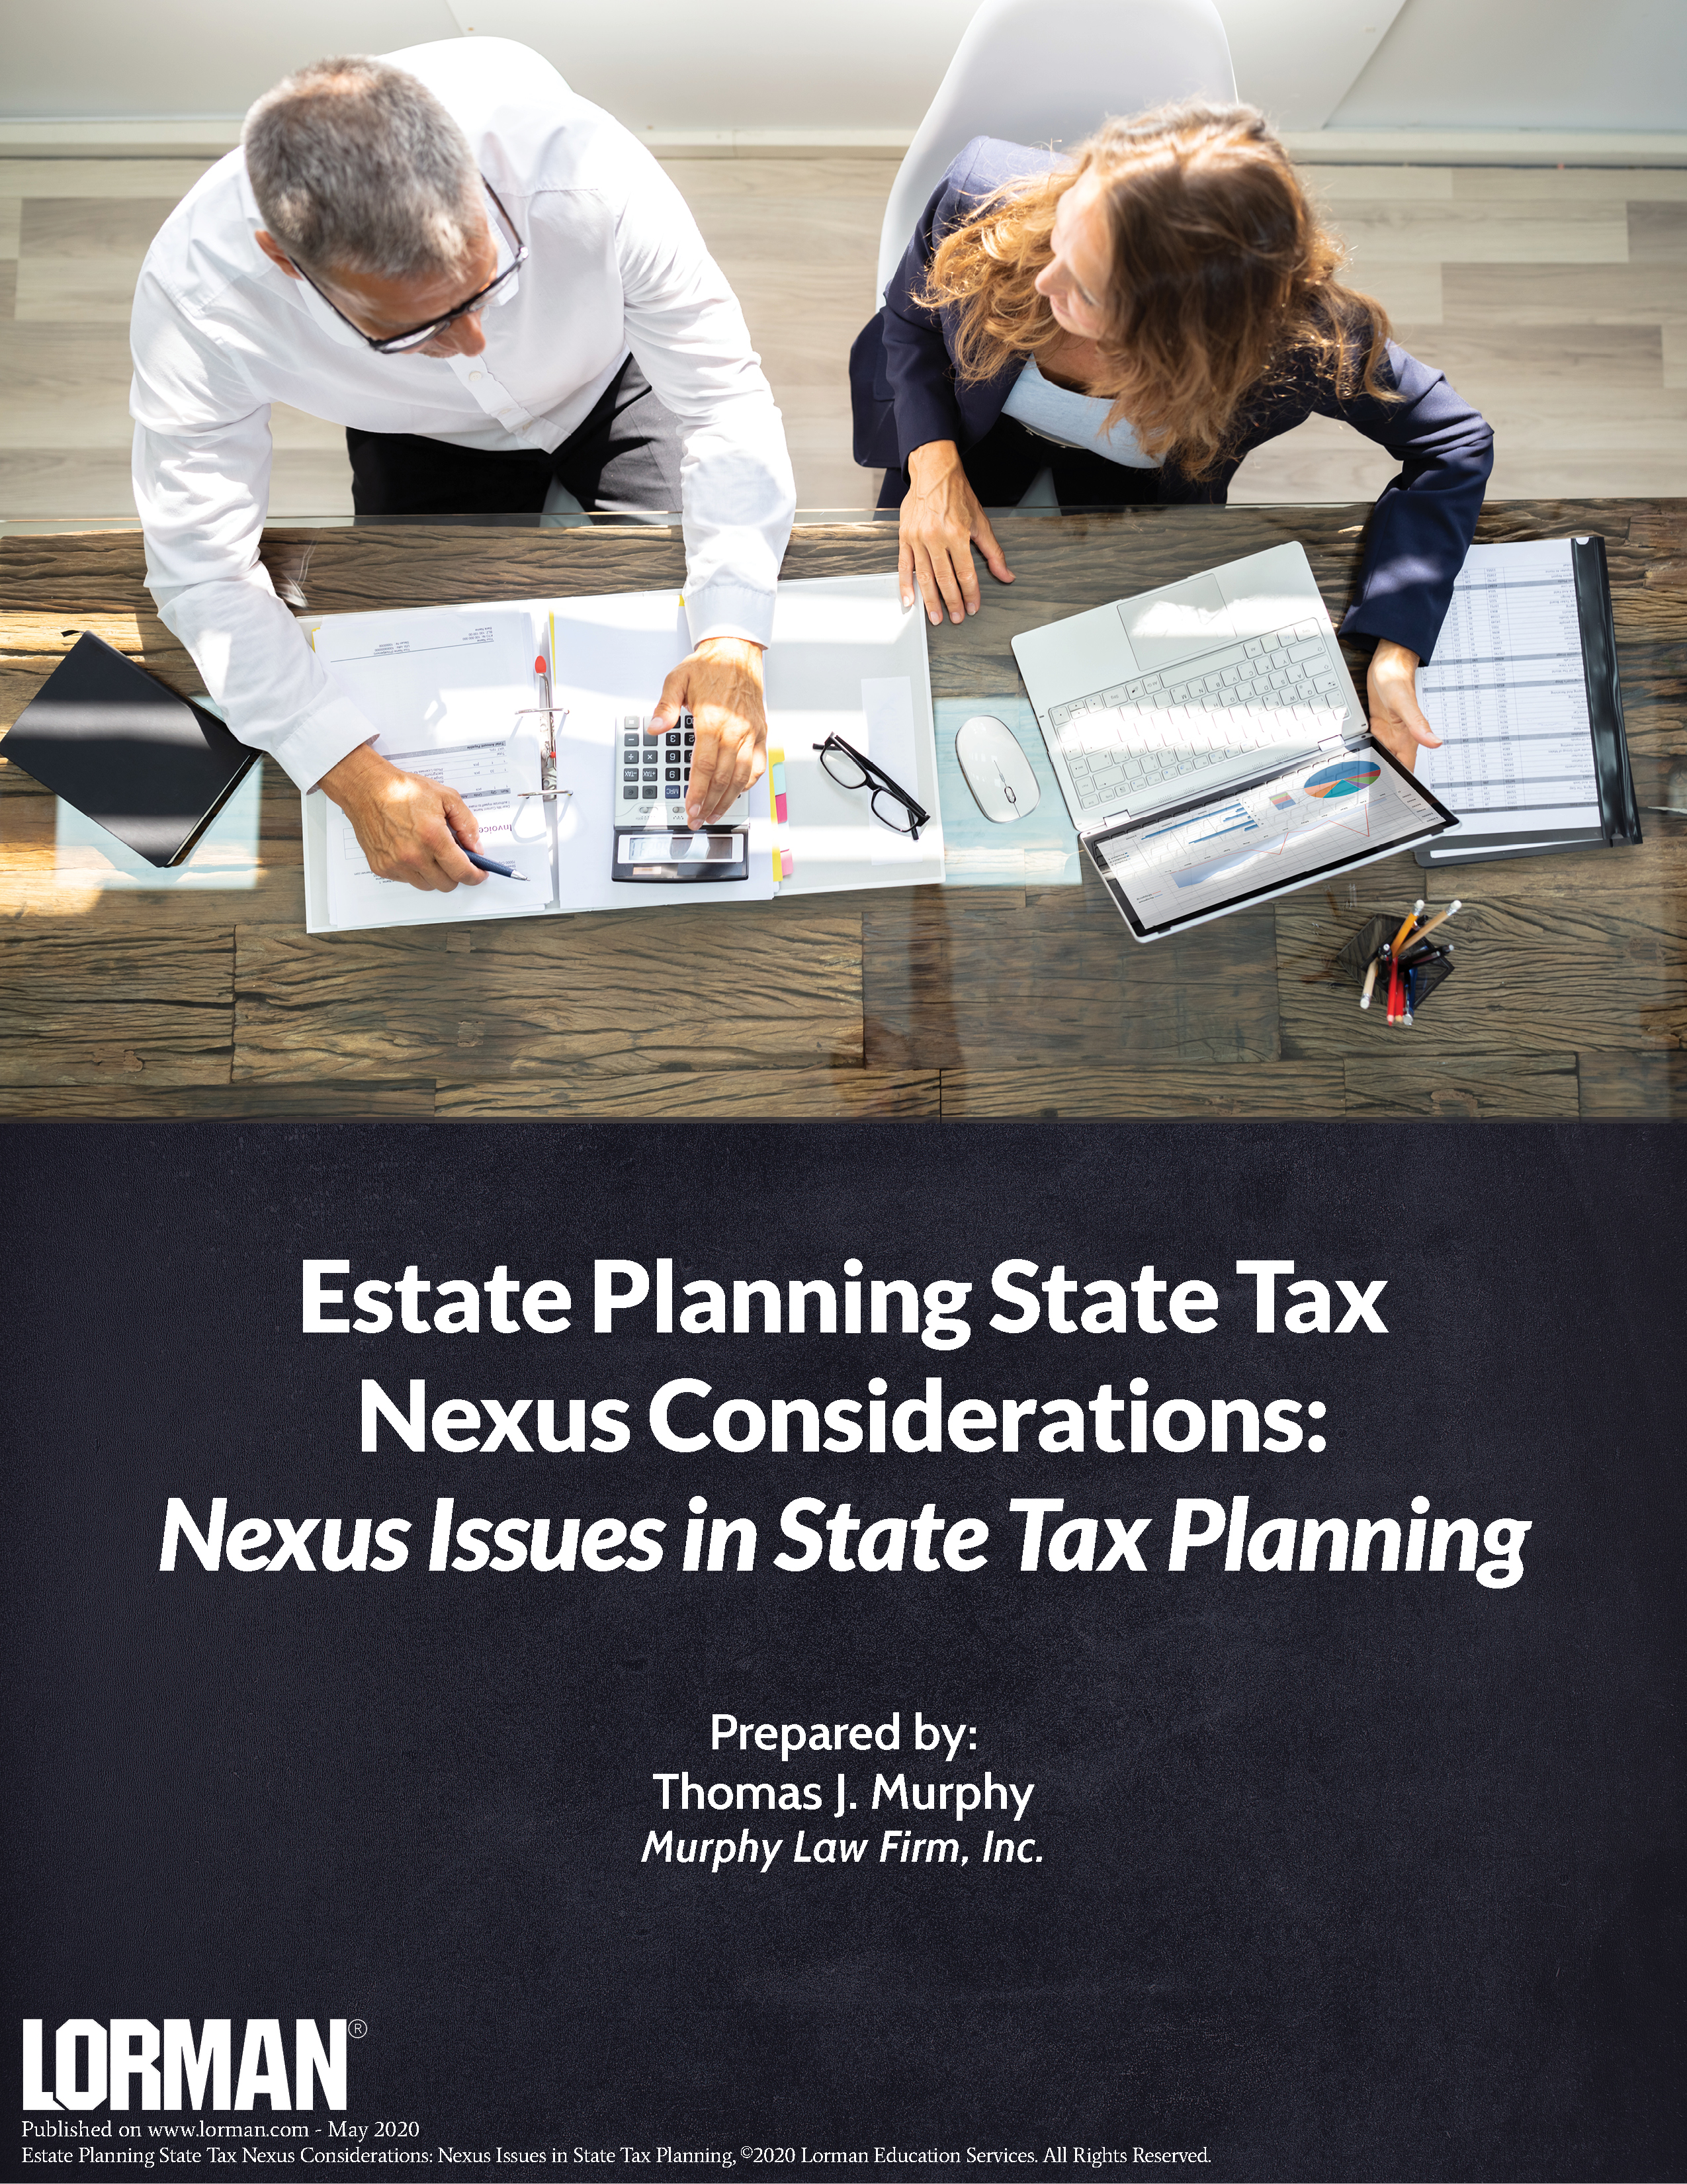 Nexus Issues in State Tax Planning